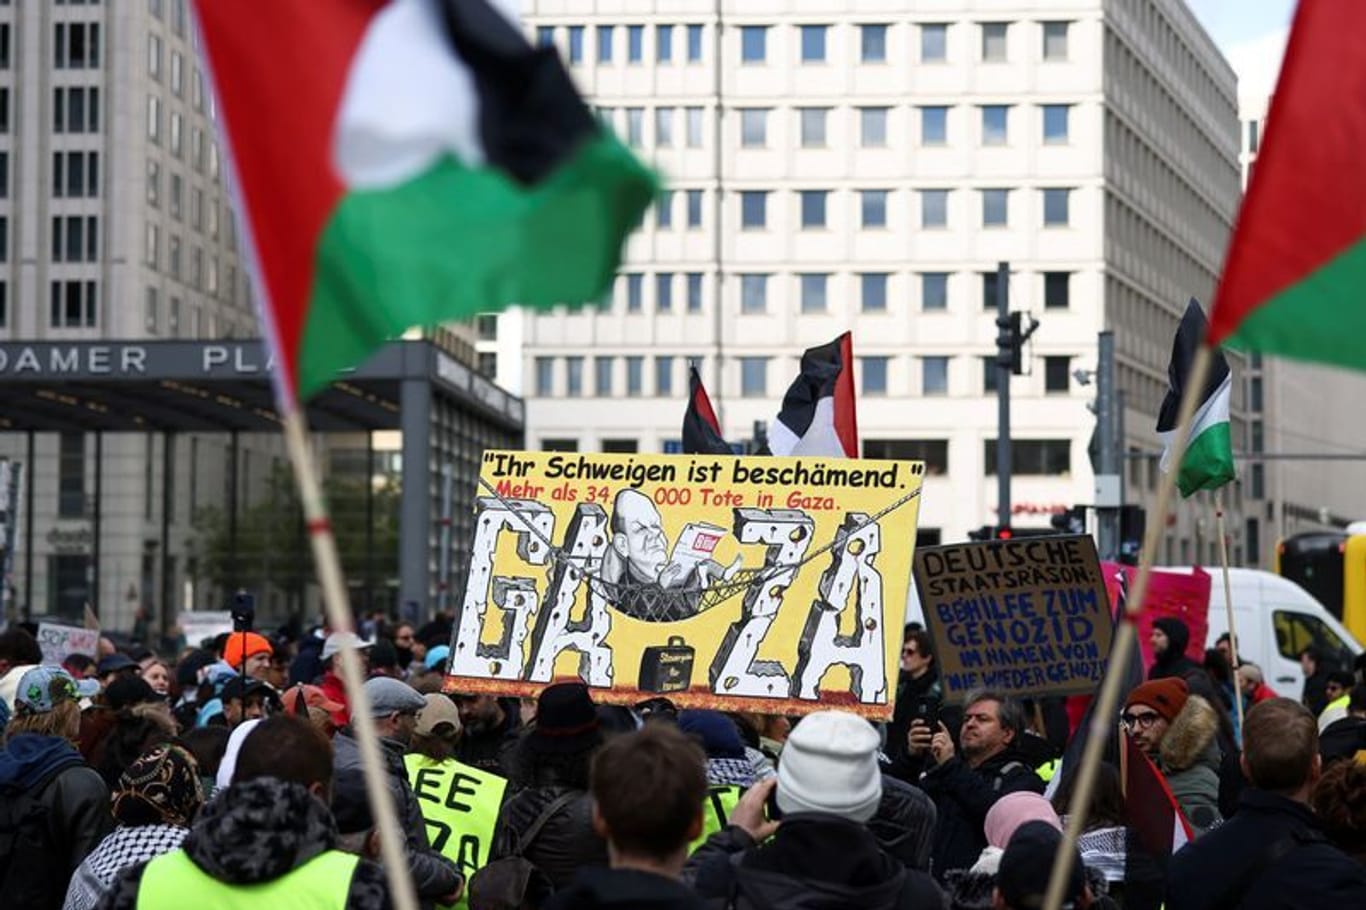 Pro-Palestinian demonstrators hold Palestinian flags and placards, as they demand "No weapons for Israel", during a protest march, amid the ongoing conflict between Israel and the Palestinian Islamist group Hamas, in Berlin, Germany